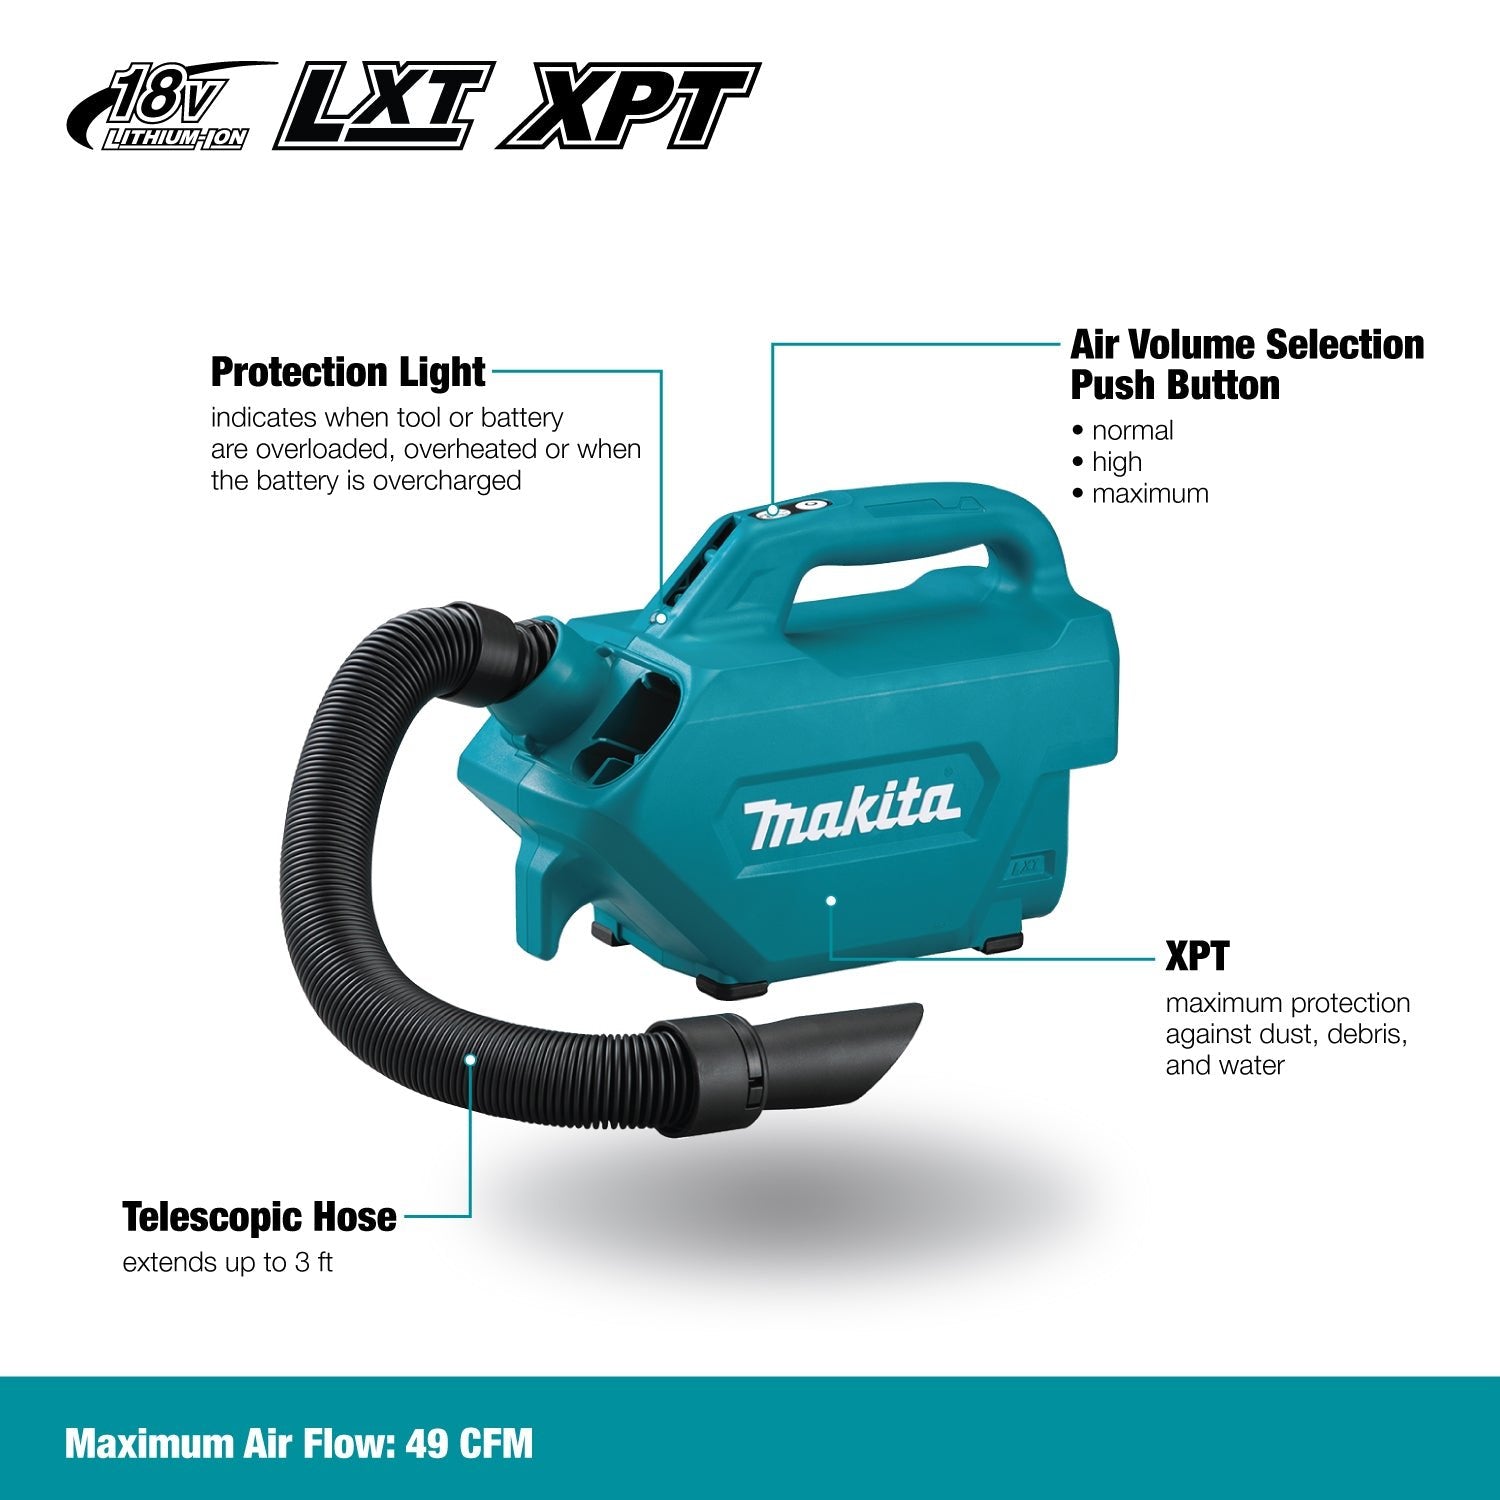 Makita DCL184Z - 18V LXT Vacuum Cleaner (500ml)